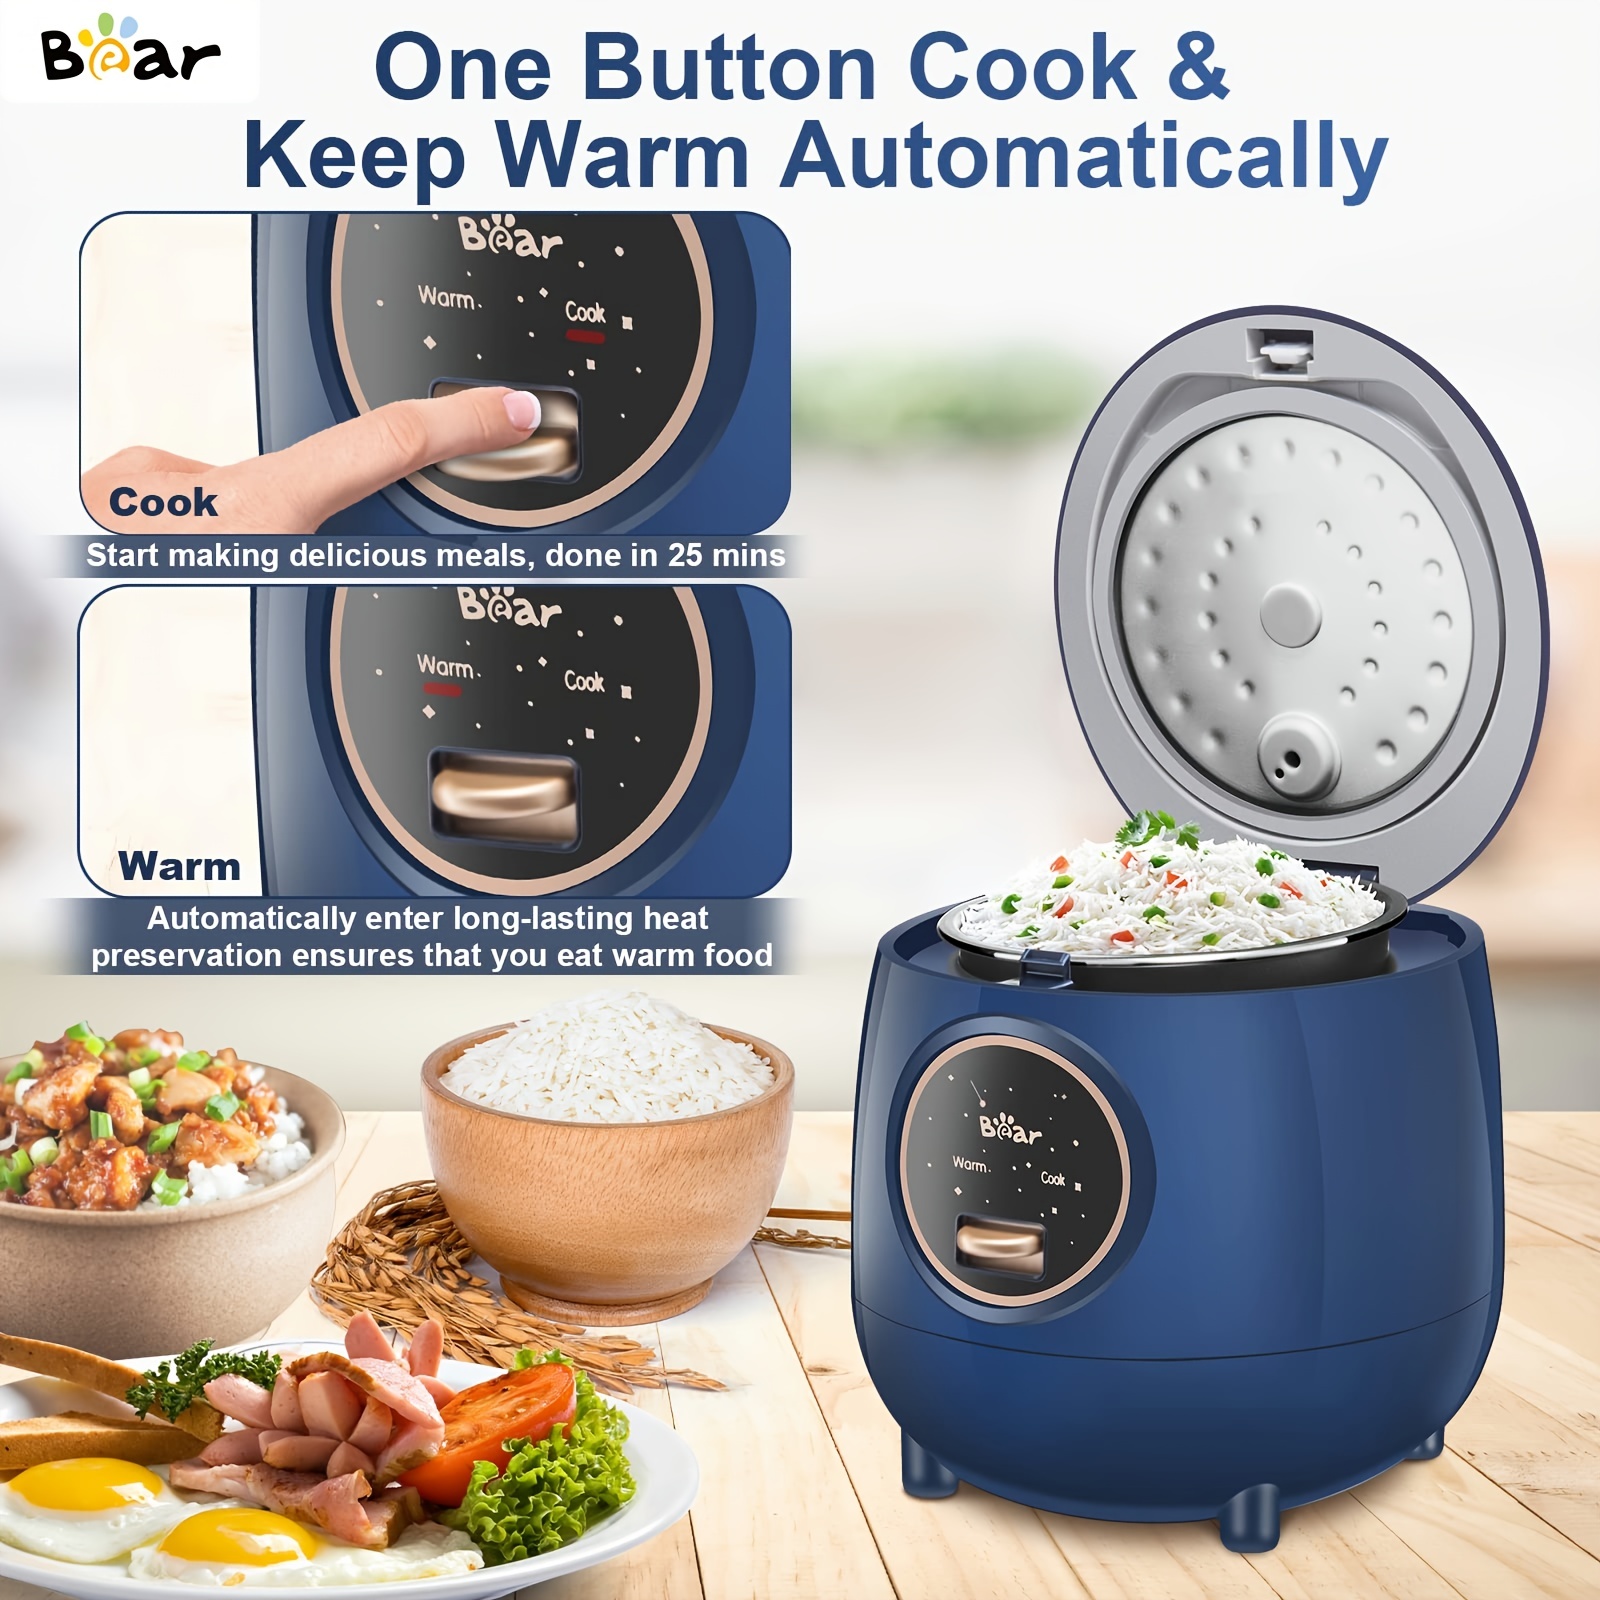 Mini Rice Cooker Portable Design,Blue,Rice Cooker Small for Long-Distance  Travel,cute rice cooker Multi-function,Rice Cooker Stainless Steel Inner